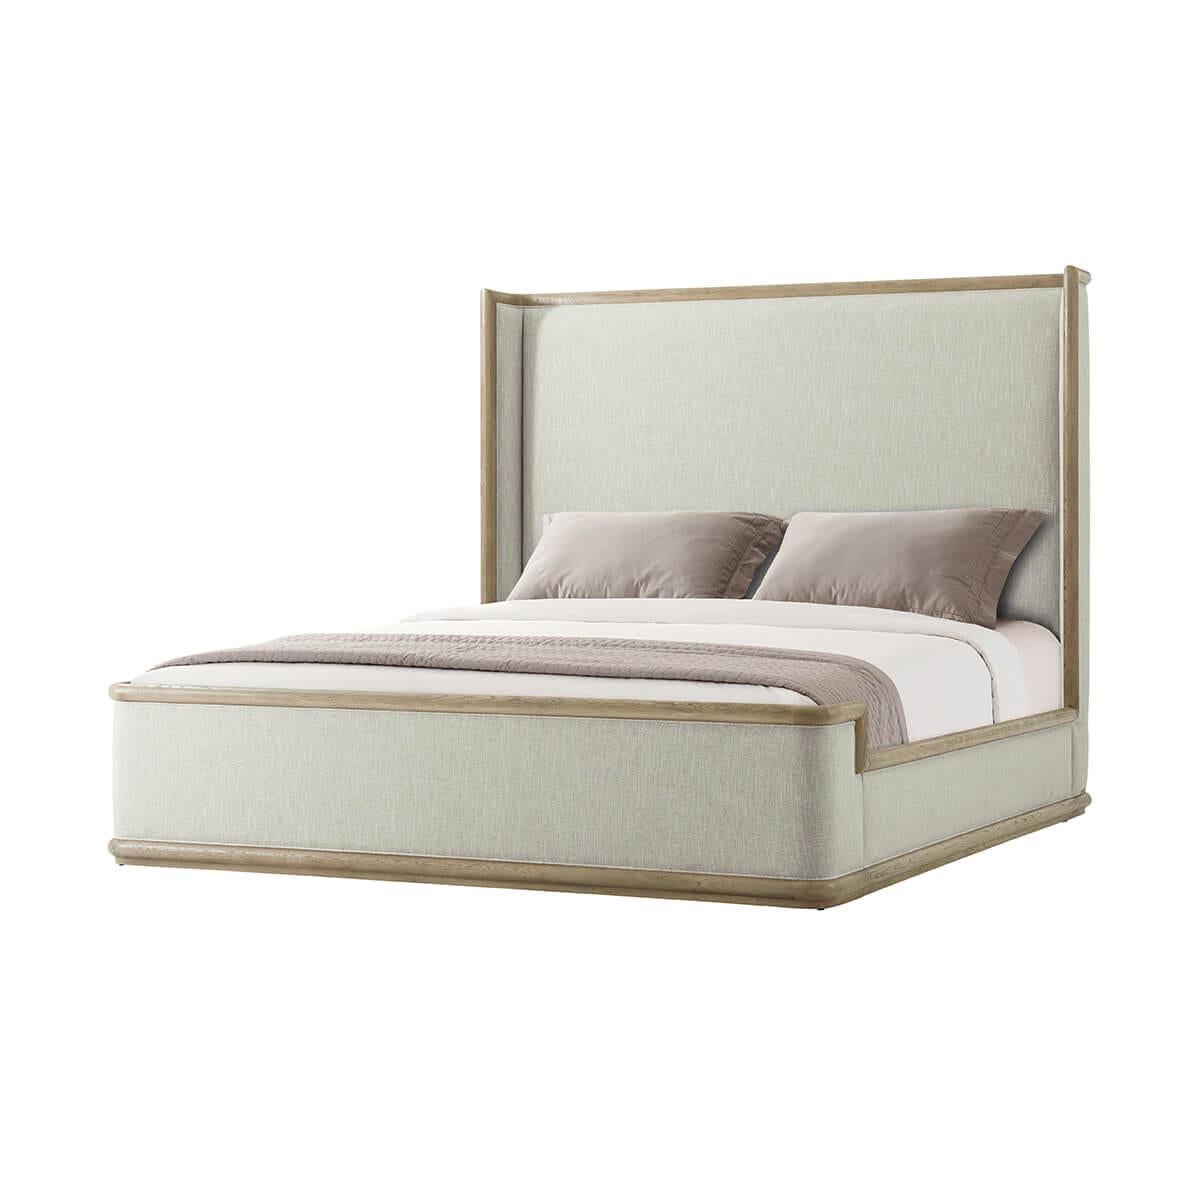 us king bed size